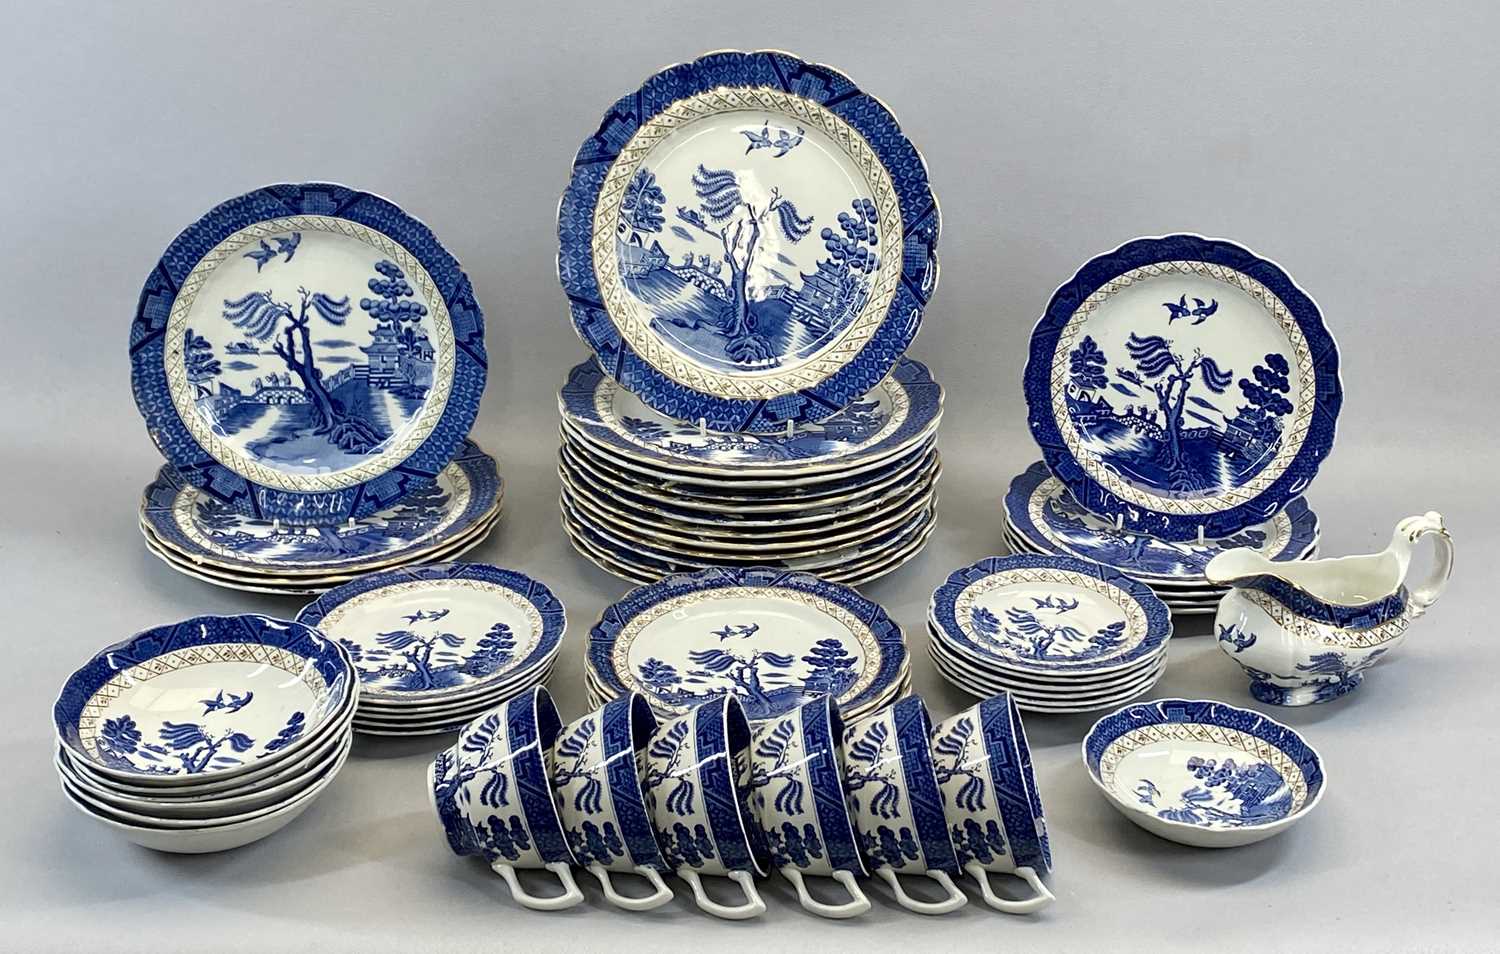 WEDGWOOD 'ARCTIC' PATTERN SERVICE, APPROX. 35 PIECES, and a Booths 'Real Old Willow' pattern - Image 3 of 3